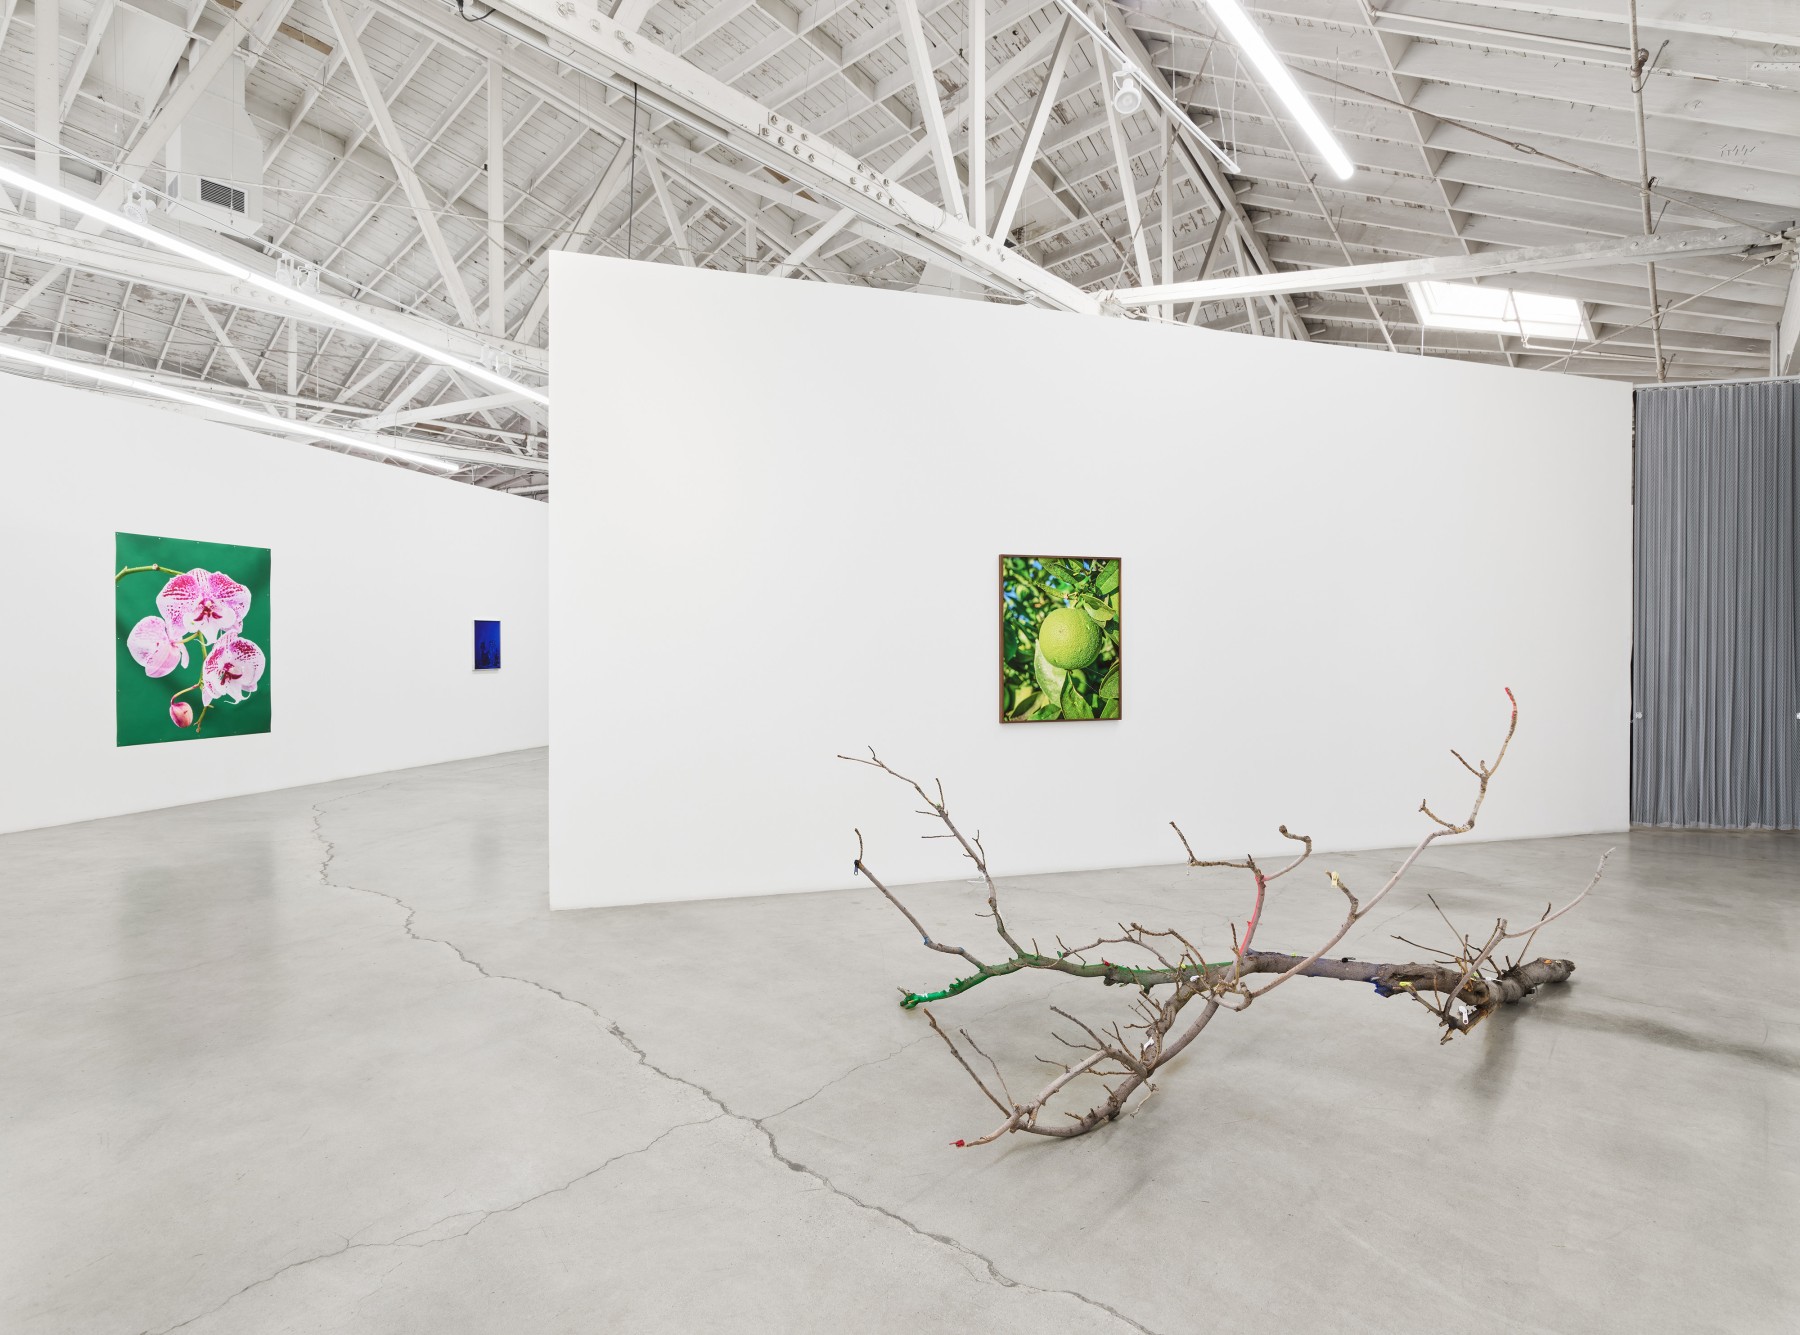 Awol Erizku, Scorched Earth, installation view, 2021